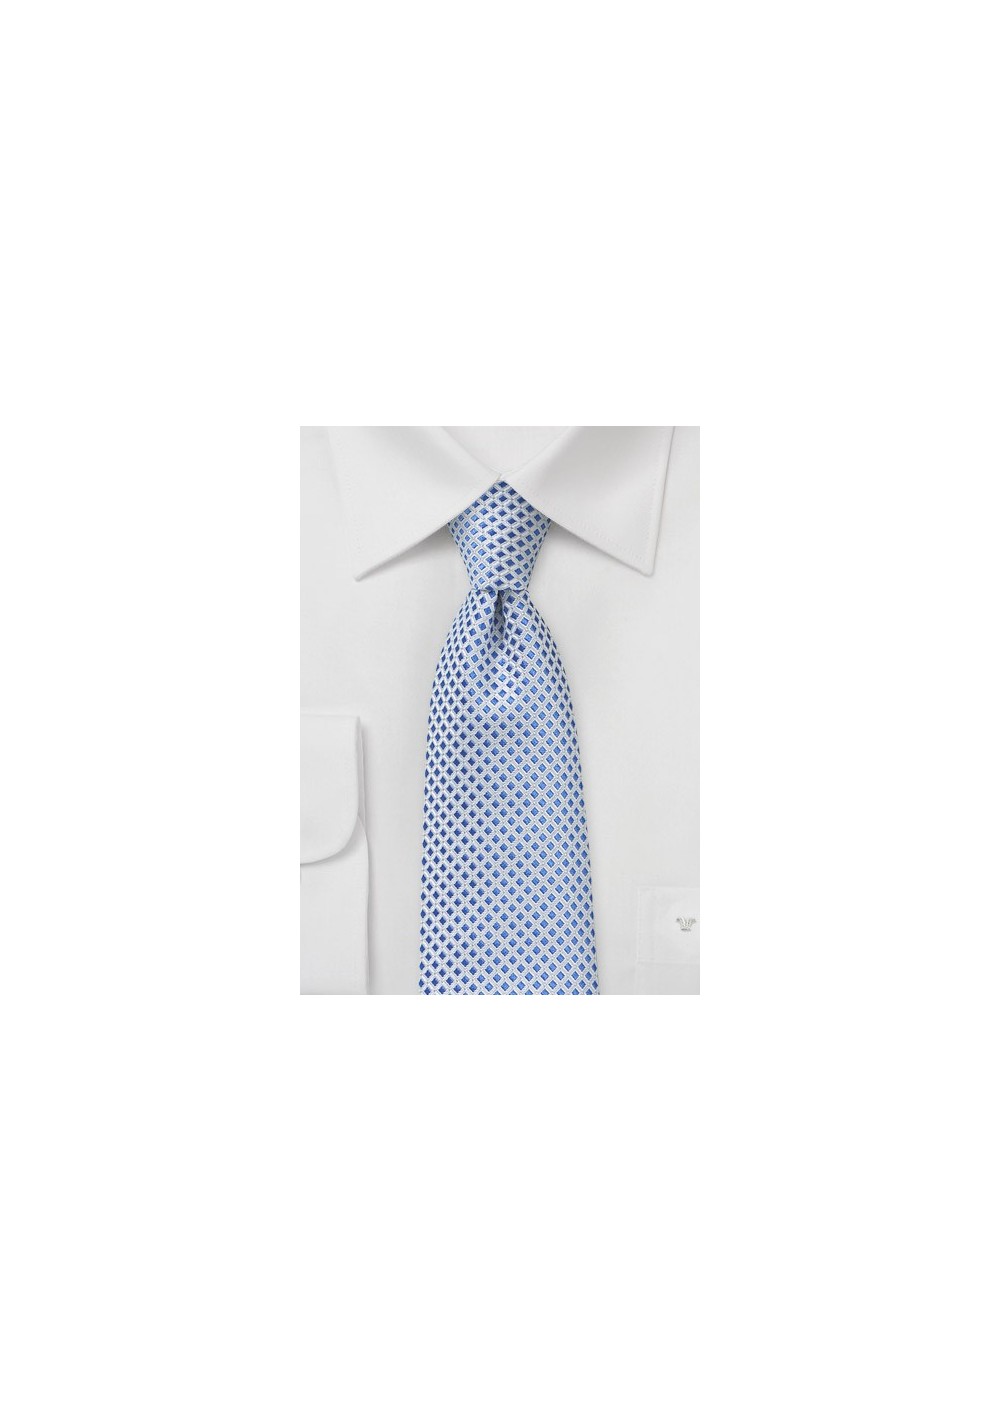 Light Blue and White Checkered Tie